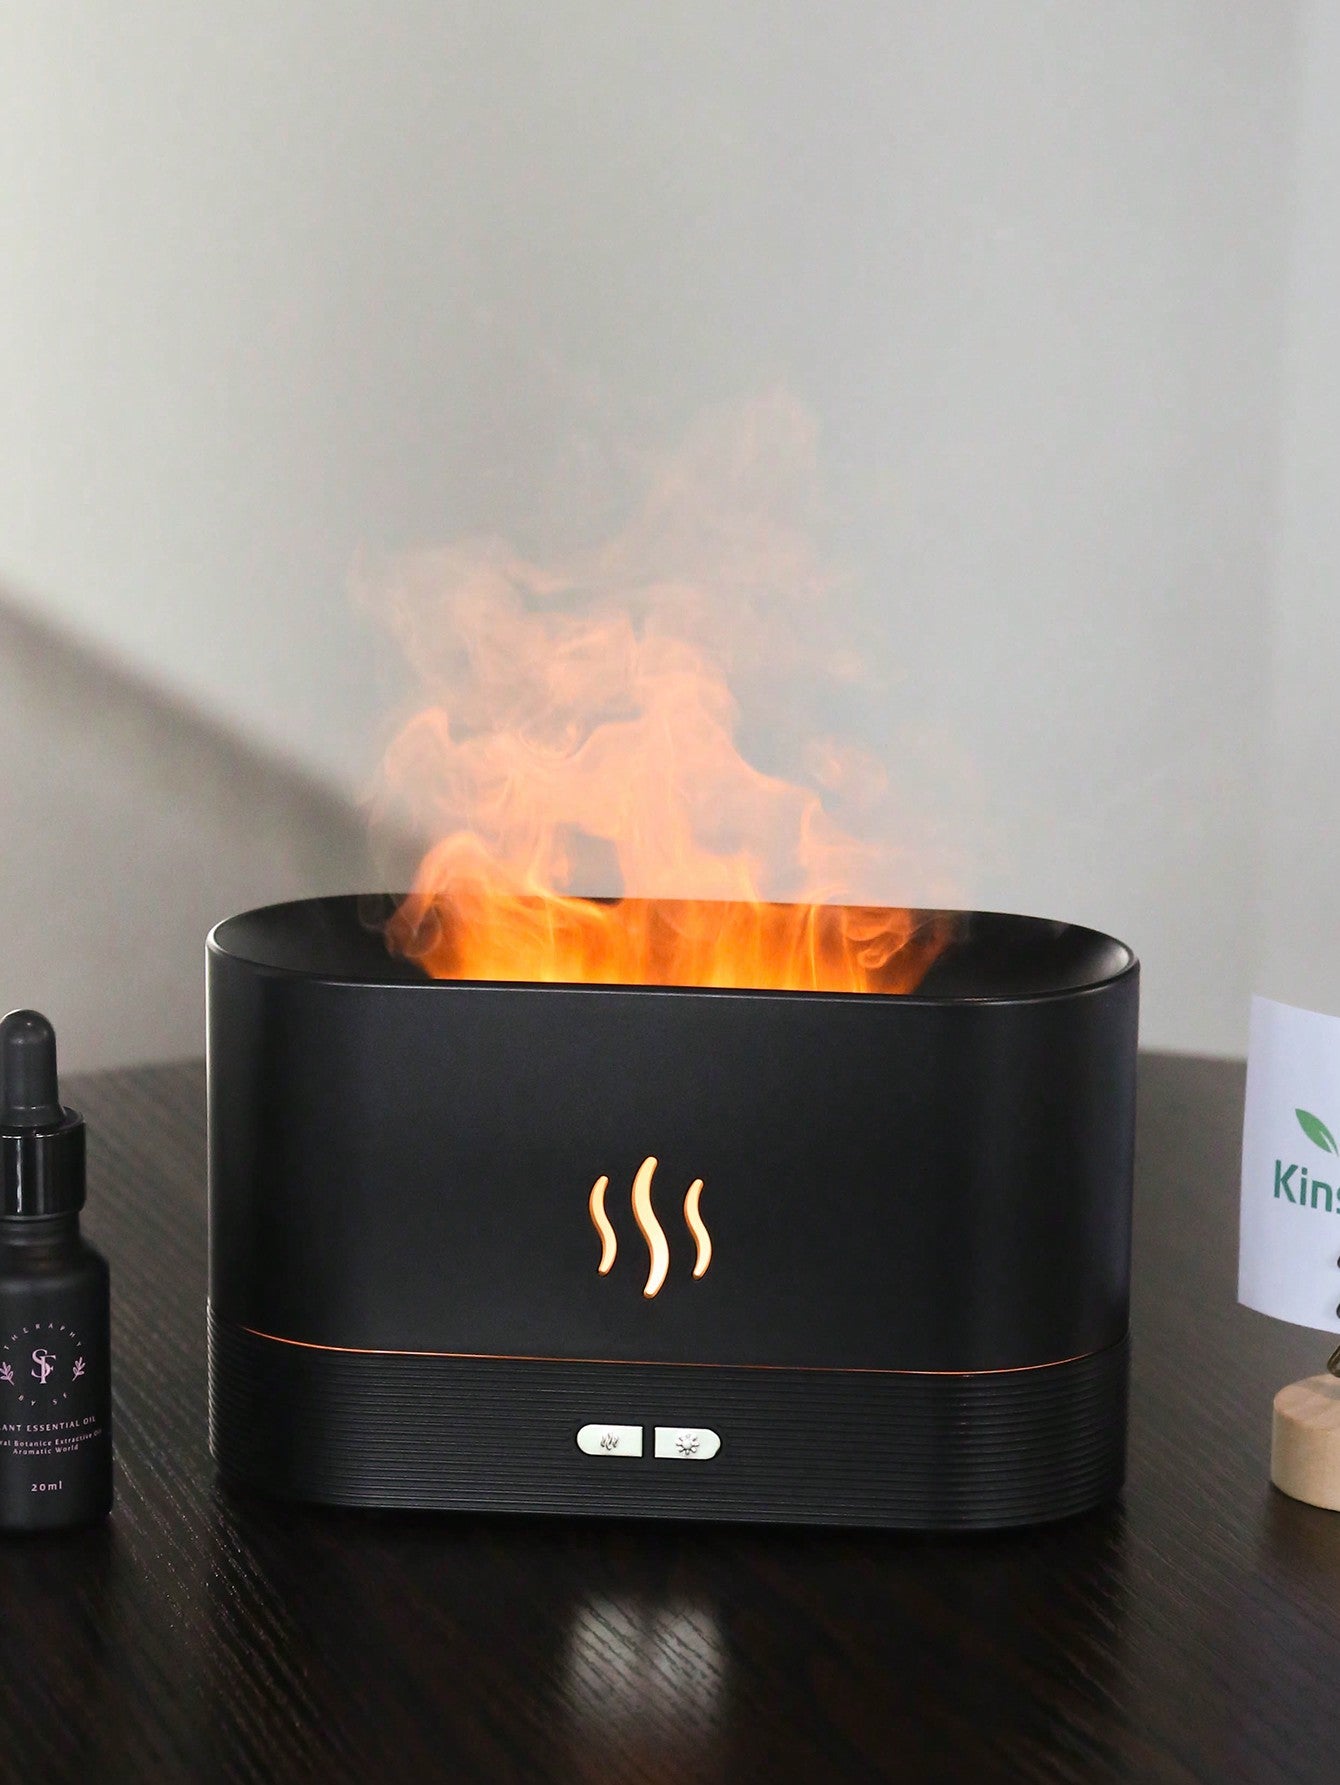 Realistic Flame Humidifier Aroma Essential Oil Diffuser 180ml